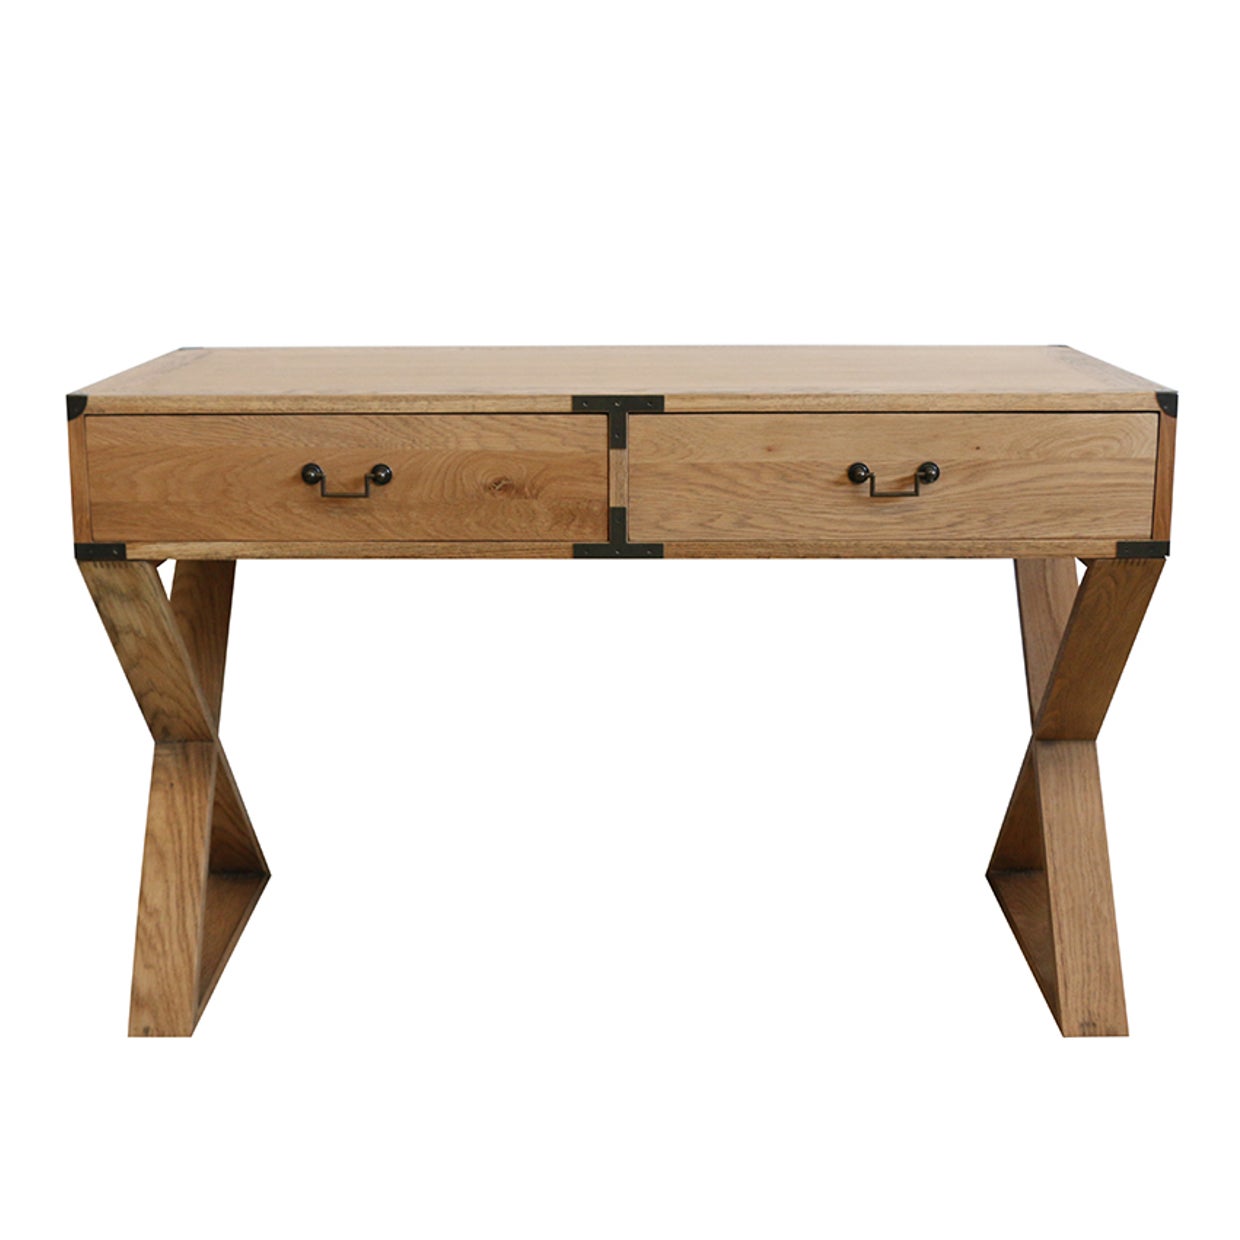 Campaign 2 Drawer Oak Desk with X legs